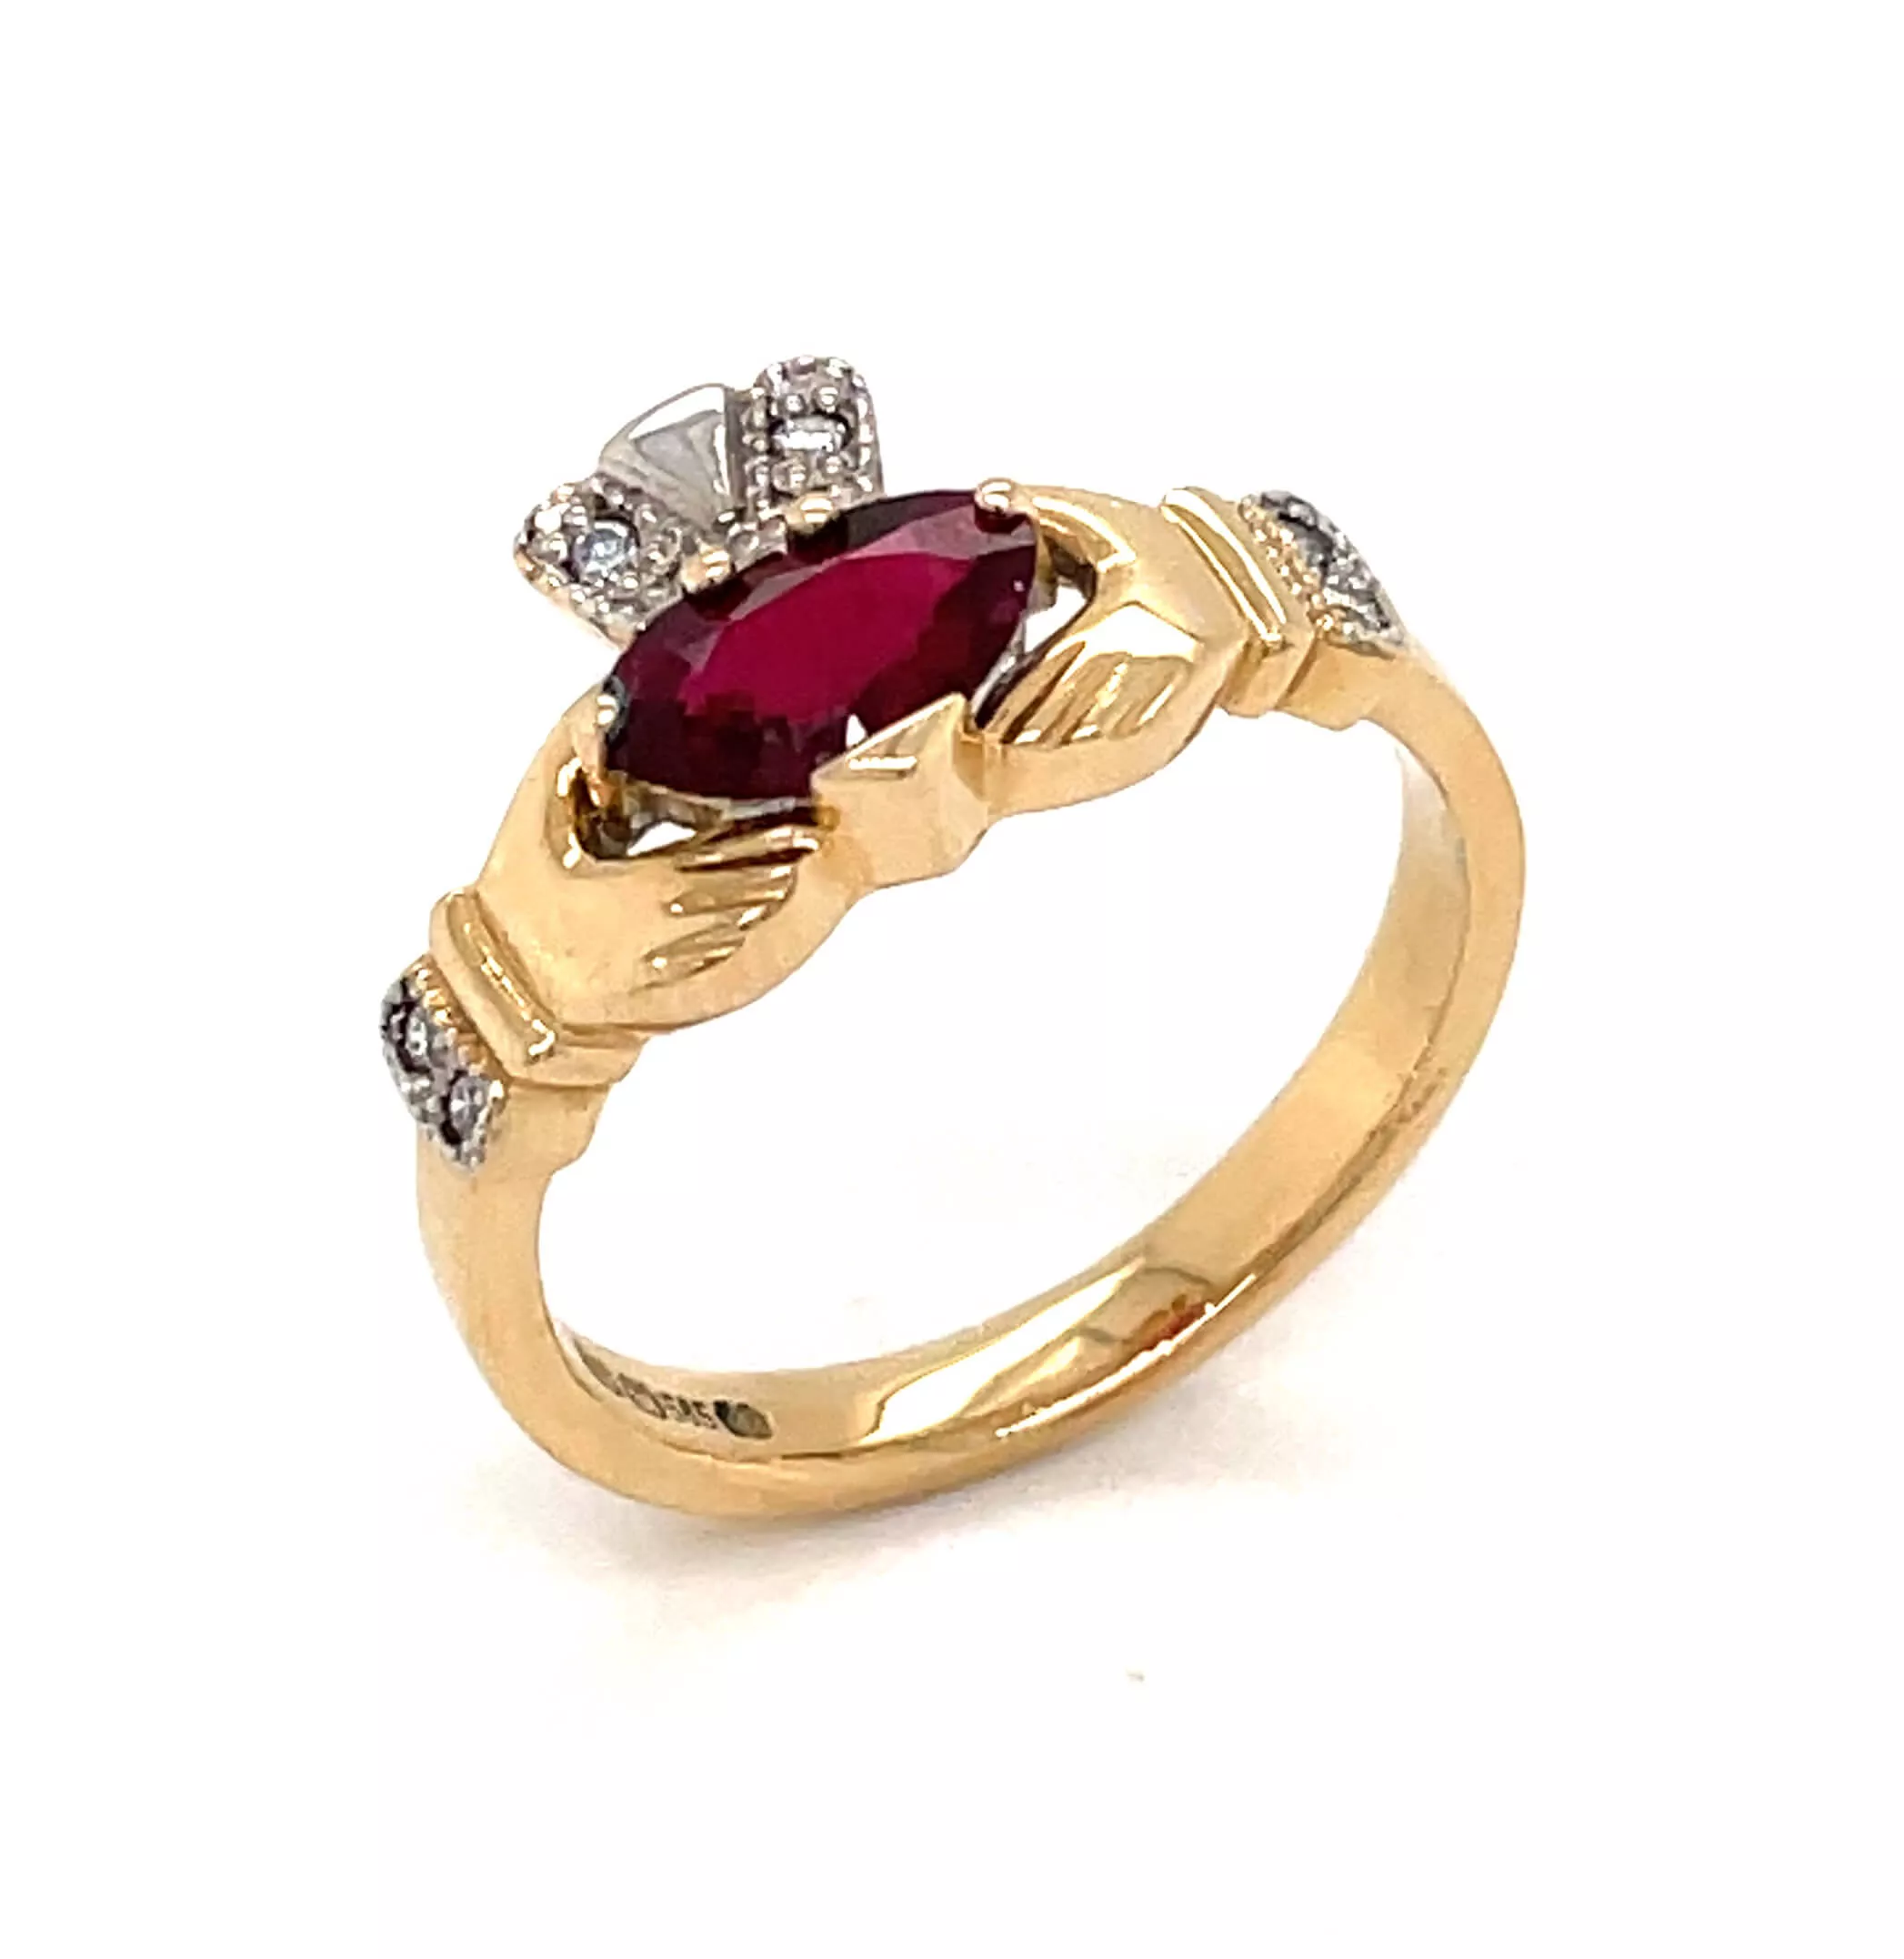 2 Claddagh Ring With Ruby Heart 2 2